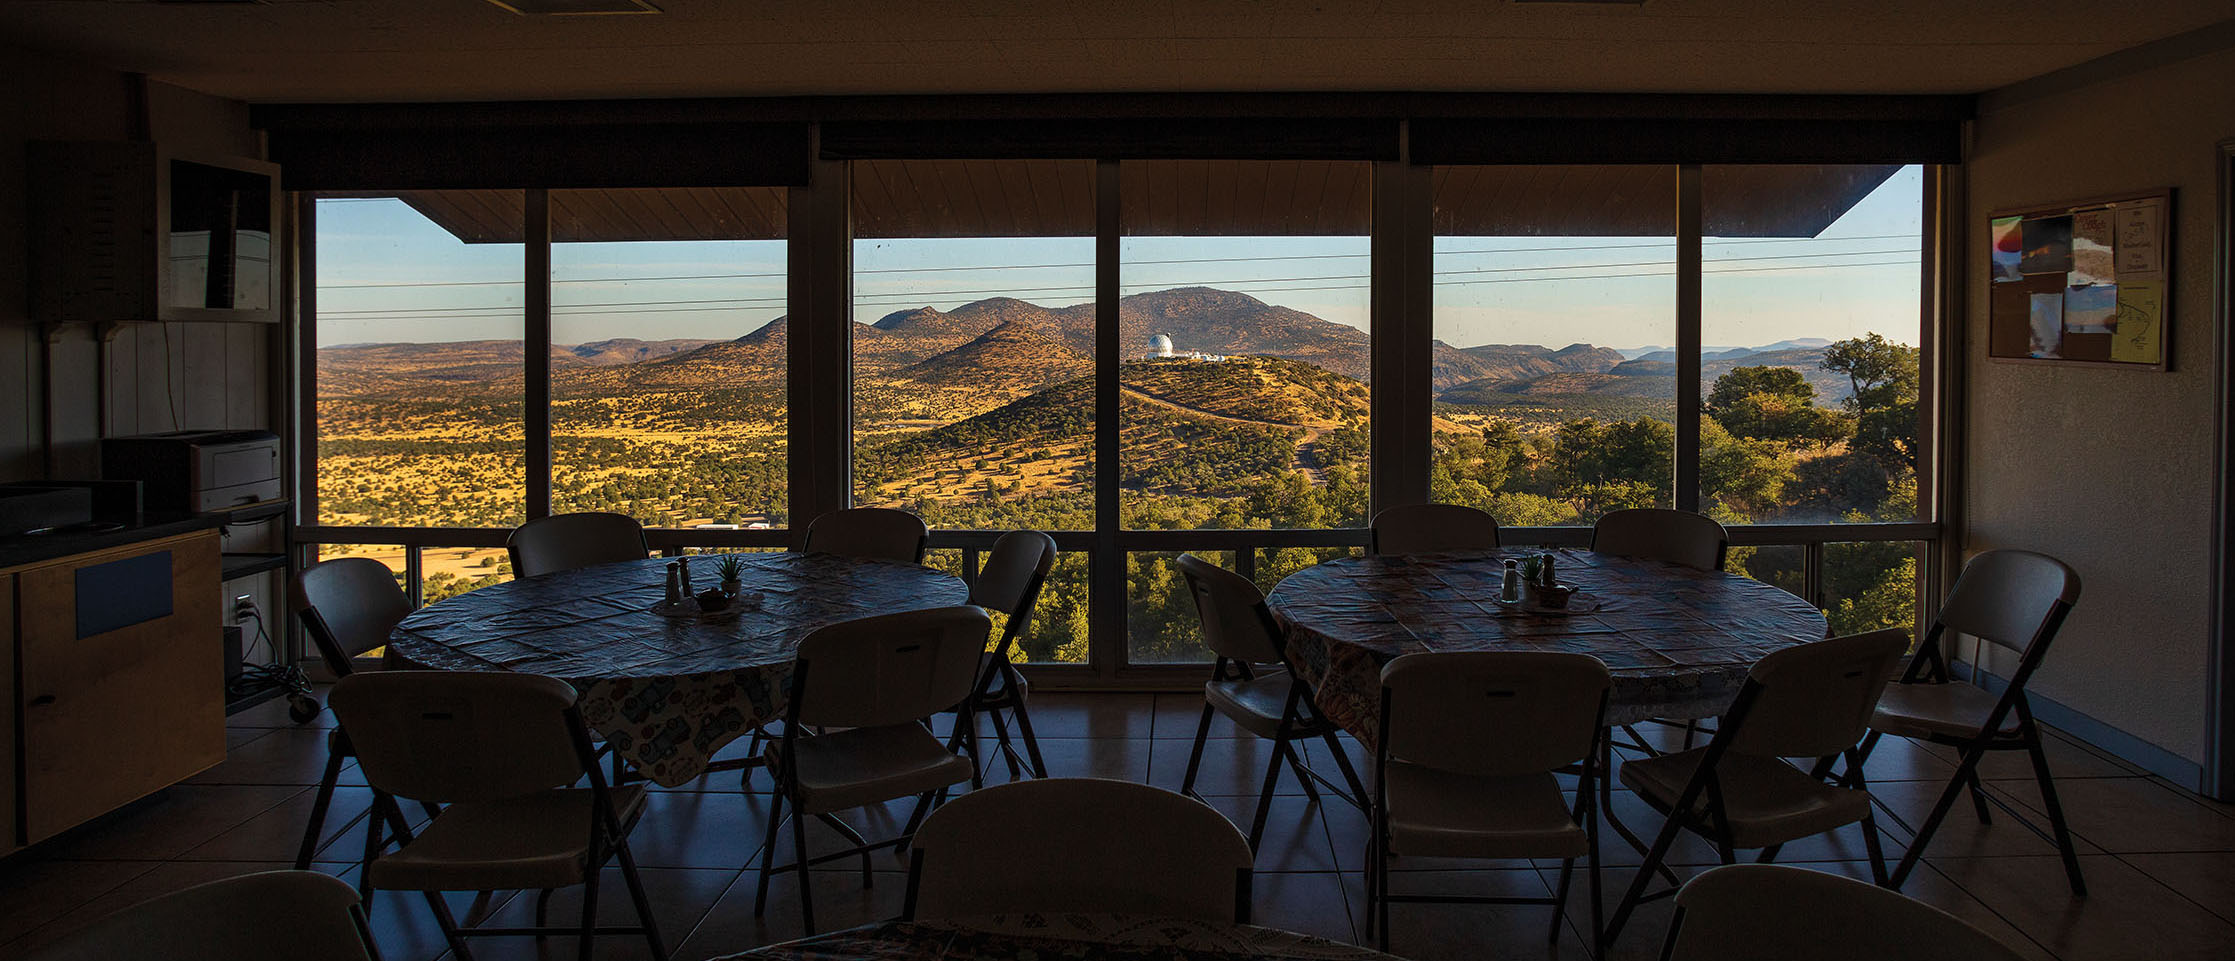 Large windows overlooking mountains and a telescope are at the back of a dimly-lit dining room with circular tables